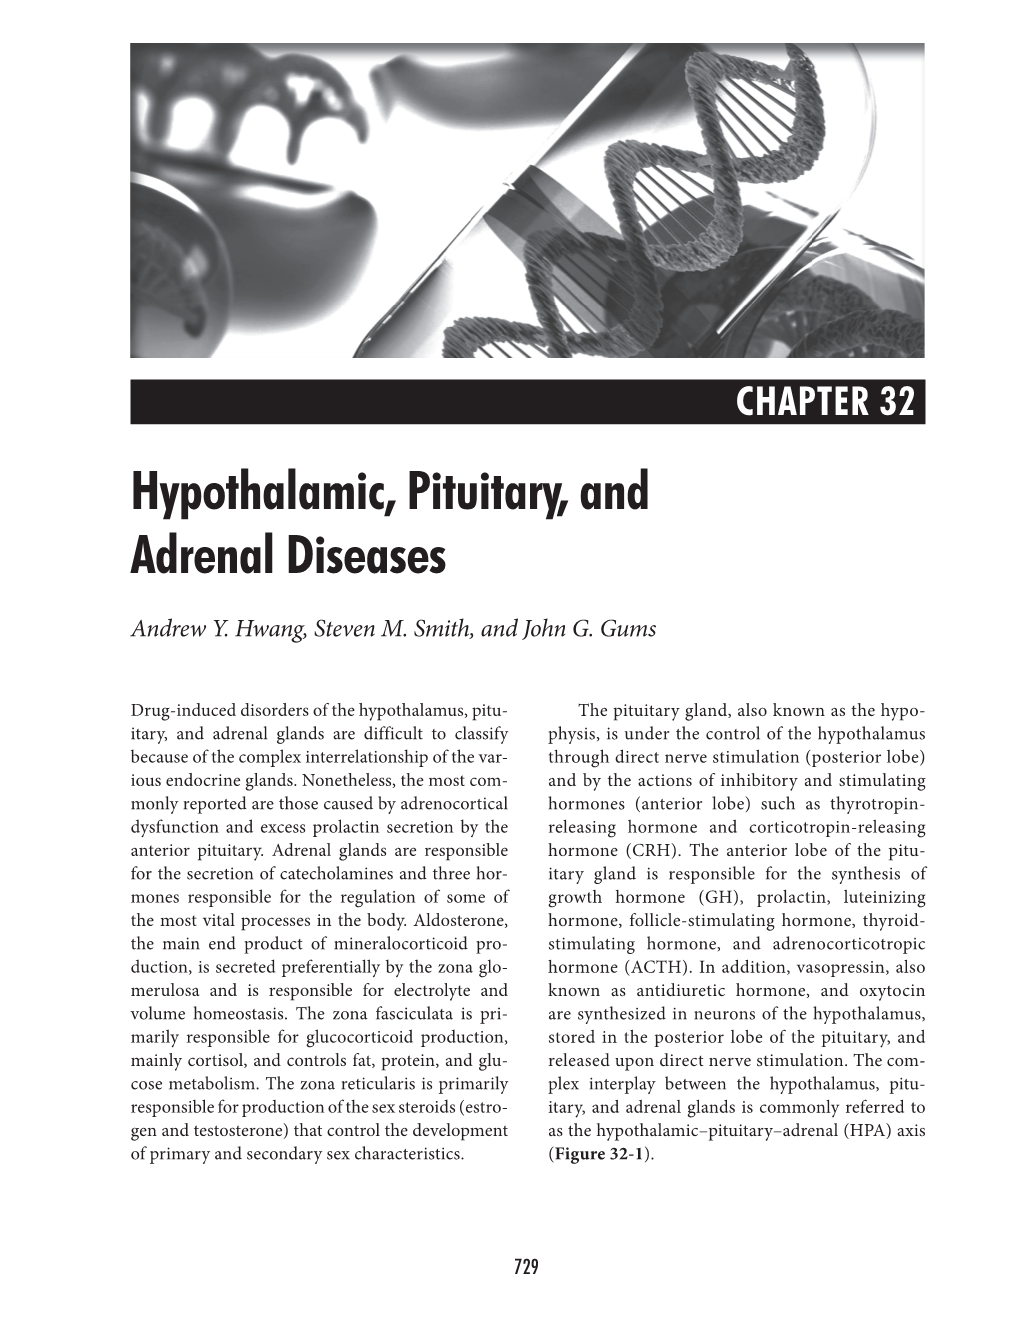 Hypothalamic, Pituitary, and Adrenal Diseases